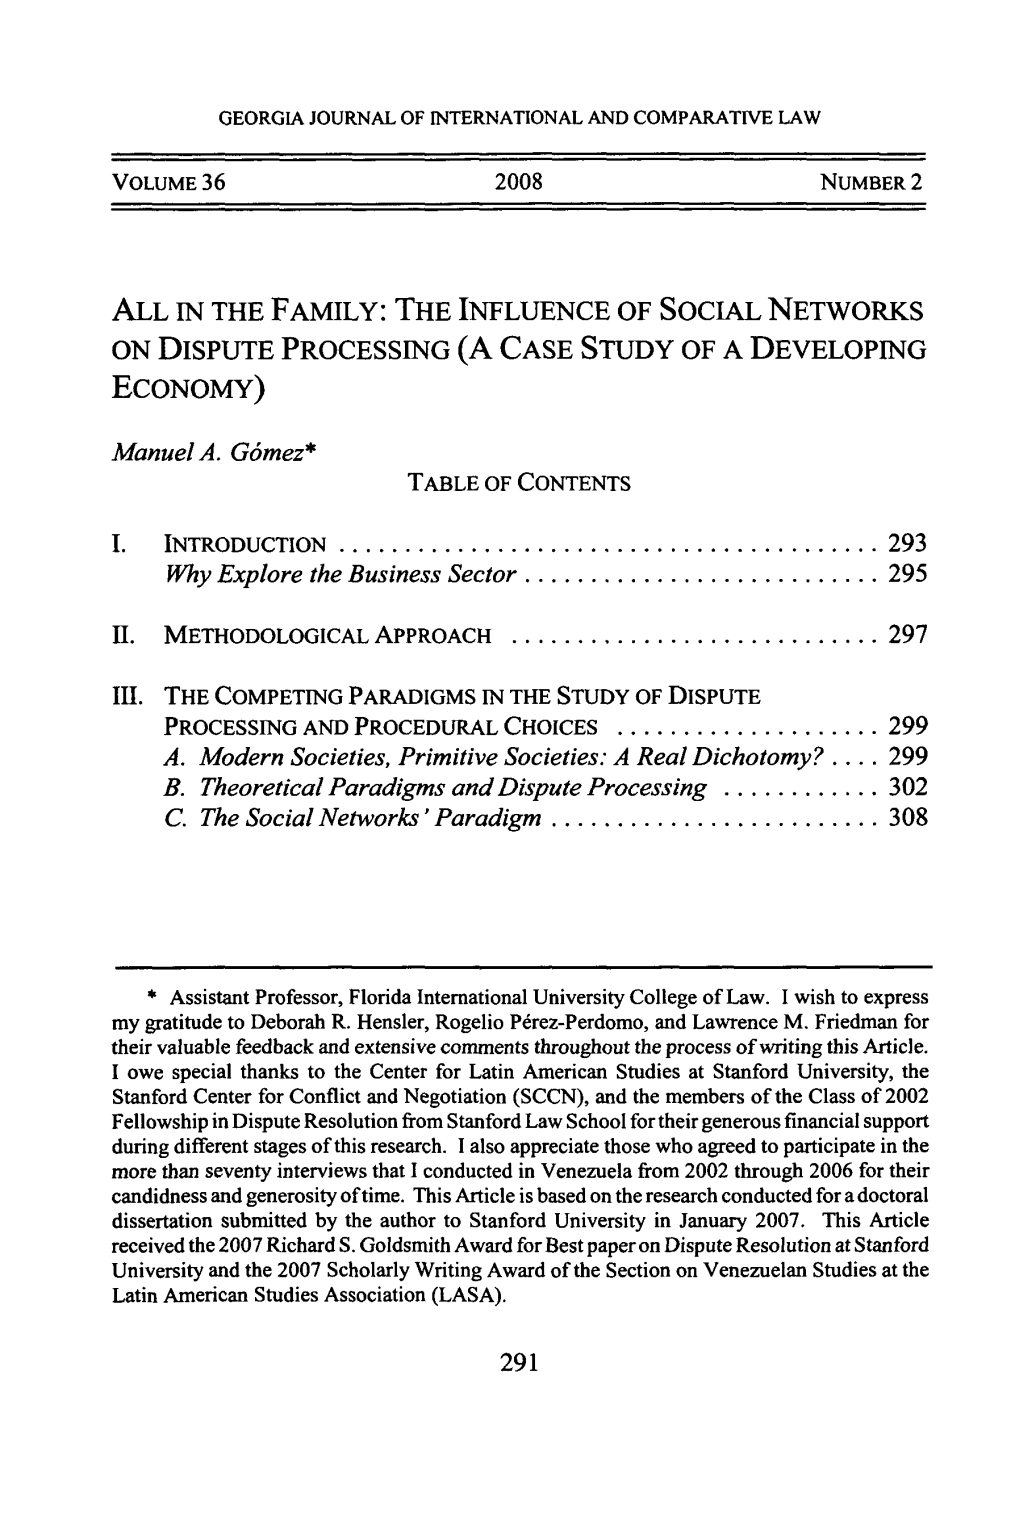 The Influence of Social Networks on Dispute Processing (A Case Study of a Developing Economy)